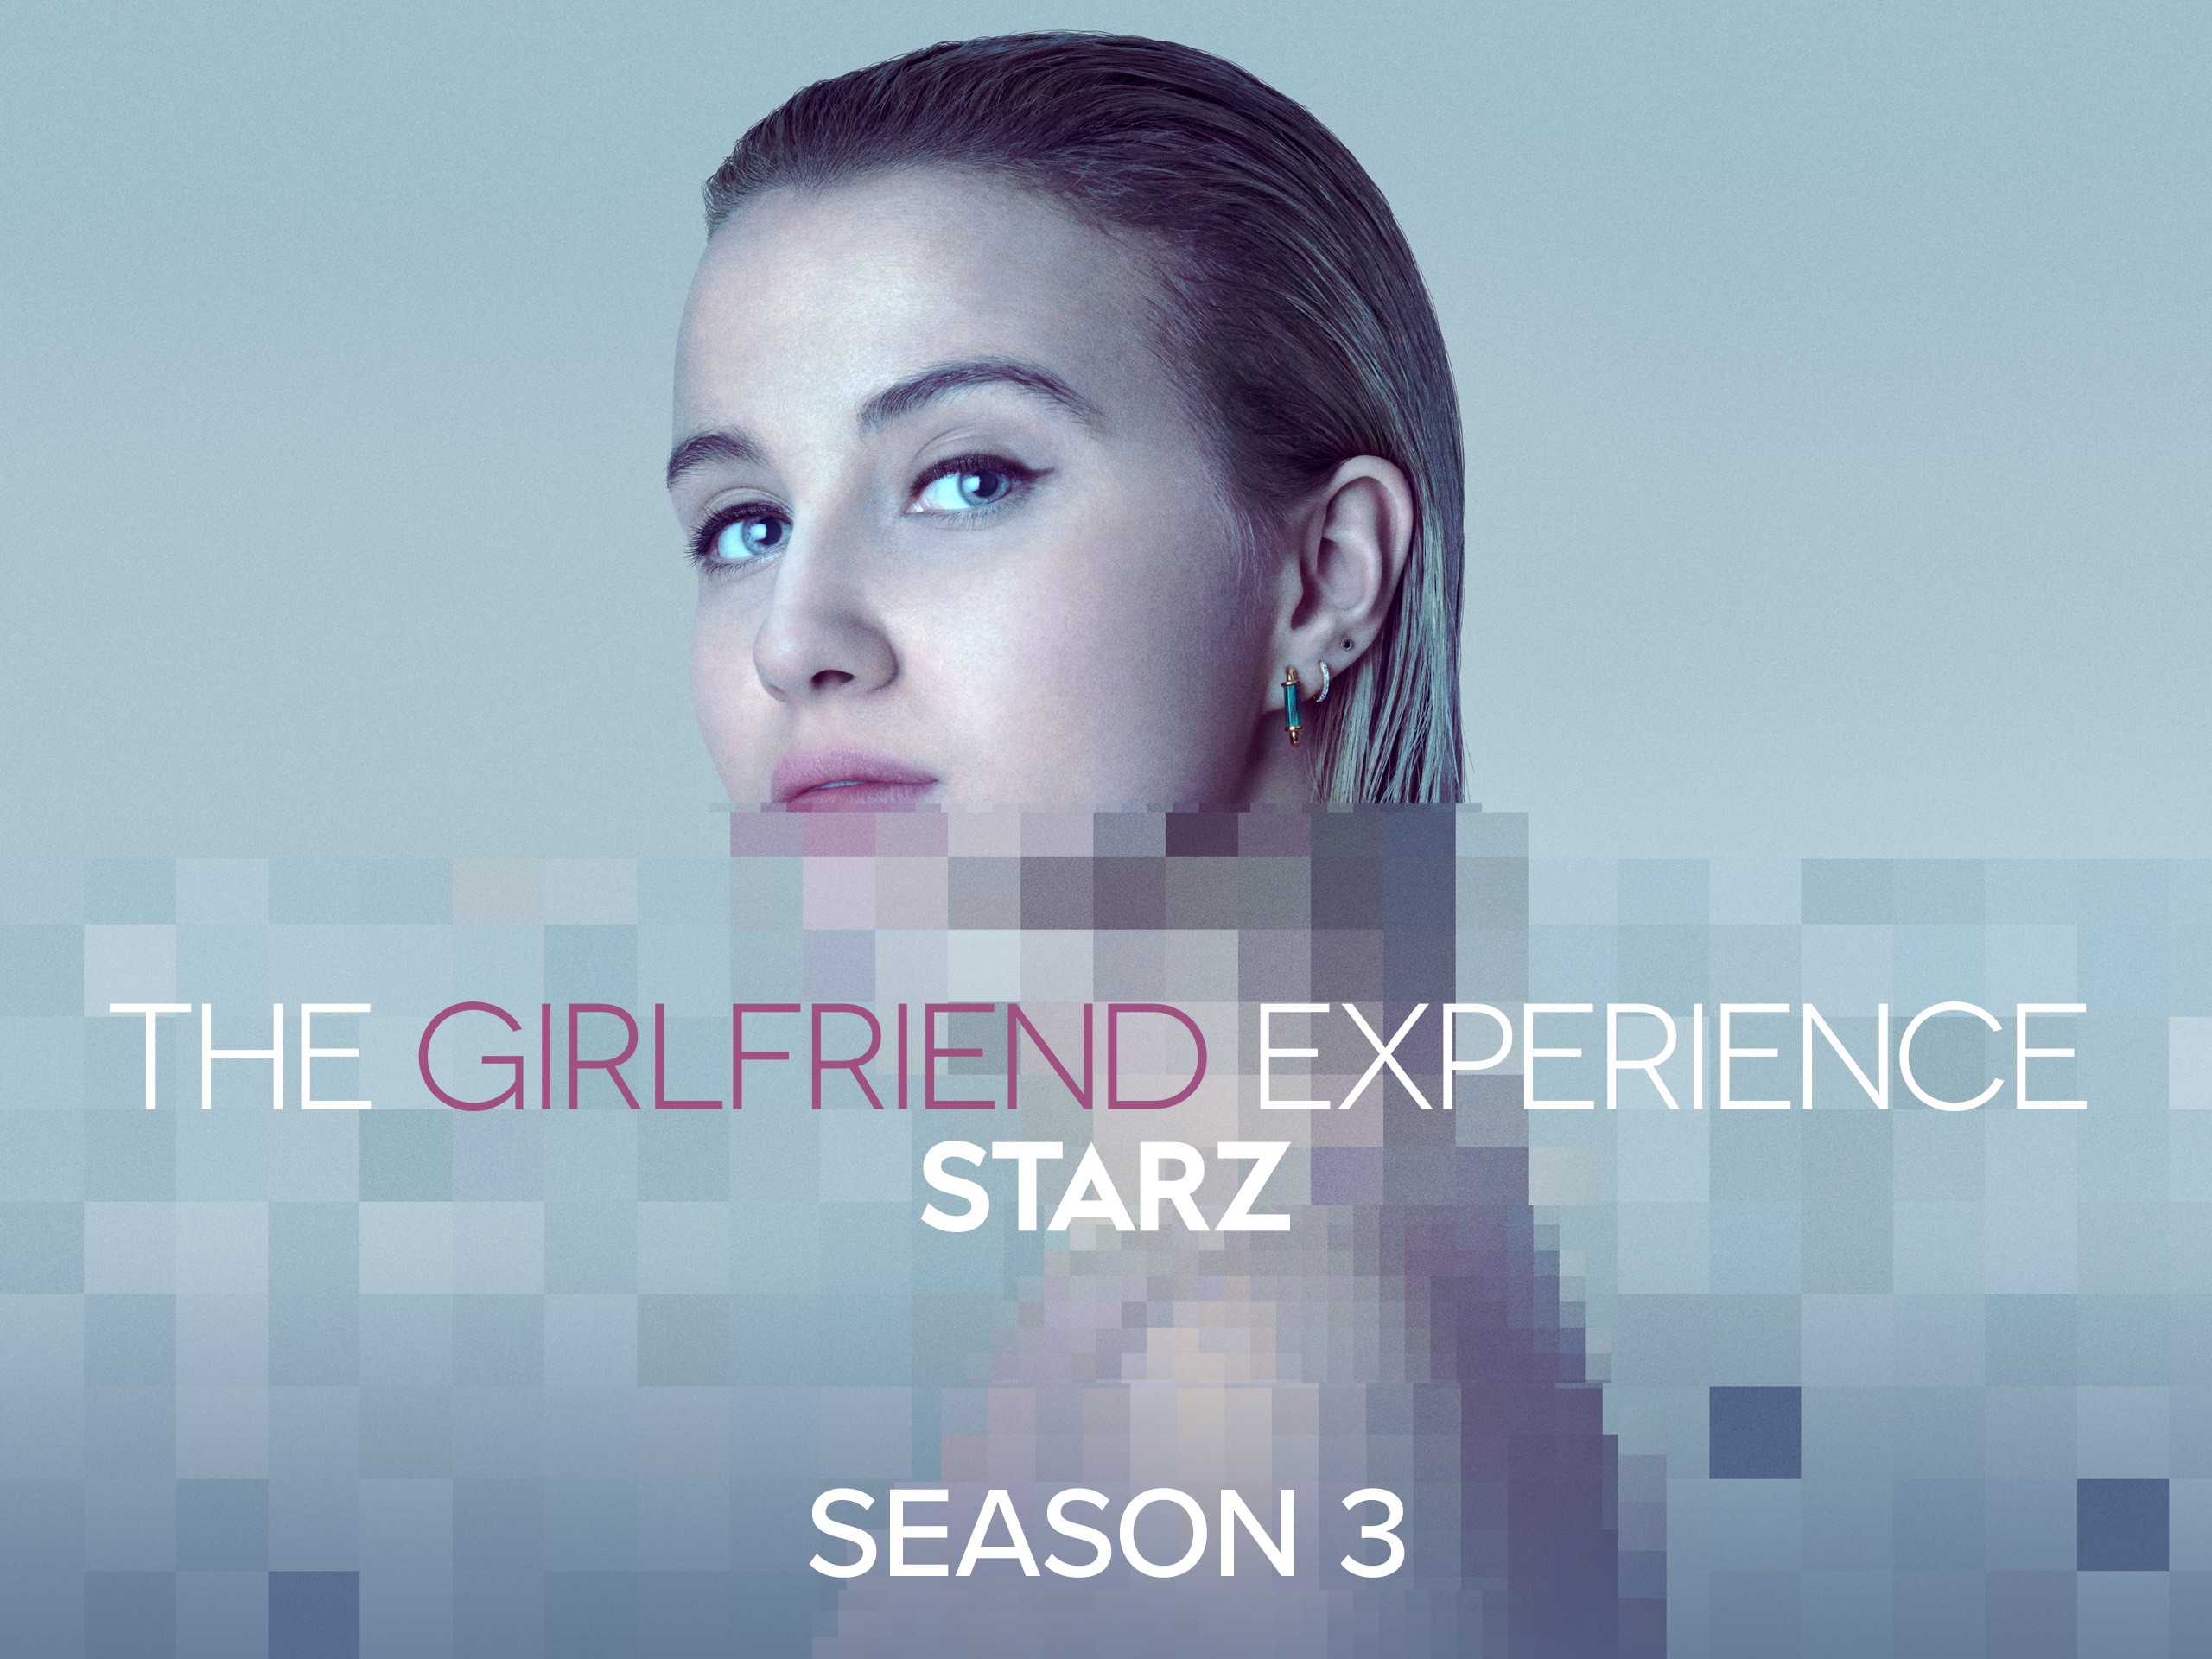 Chiraz in ‘THE GIRLFRIEND EXPERIENCE’